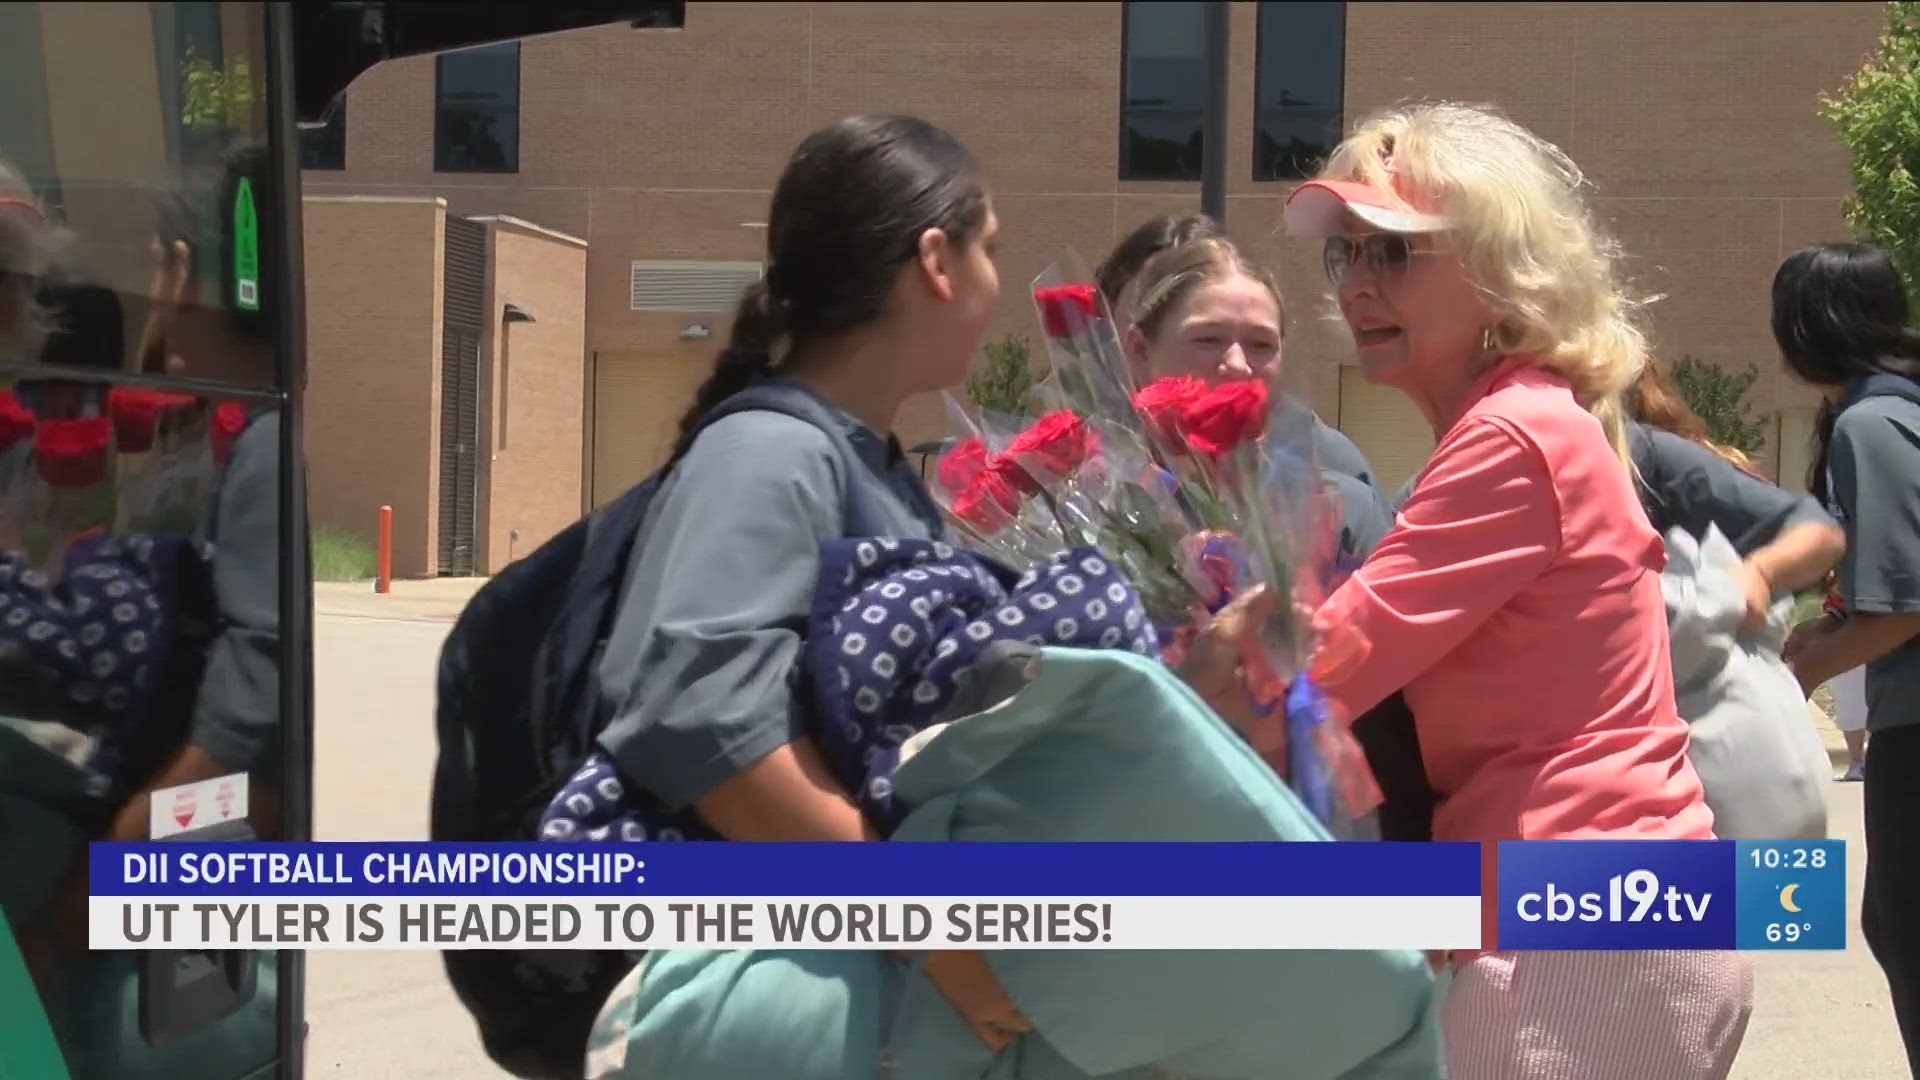 The UT Tyler Patriots left campus Monday morning to head to Chattanooga, Tennessee to compete in the Division II College World Series